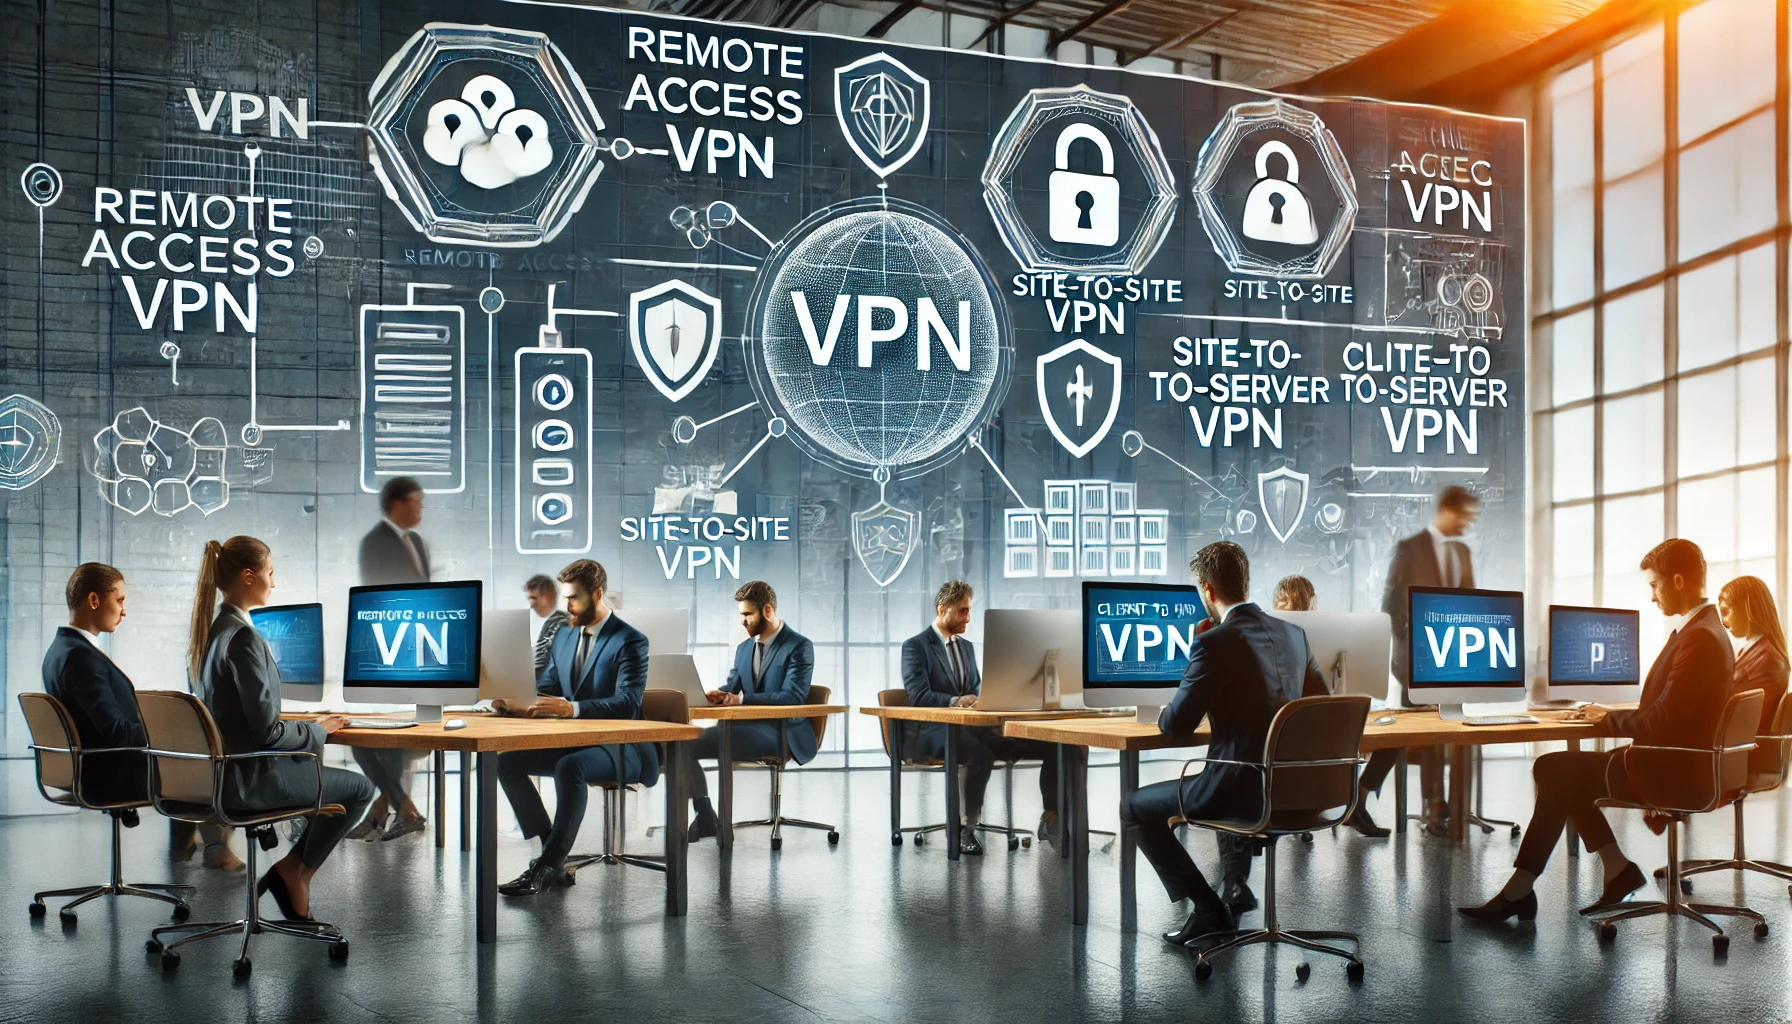 "Employees in a business office setting working on computers with a large screen displaying various VPN configurations like Remote Access VPN, Site-to-Site VPN, and Client-to-Server VPN."